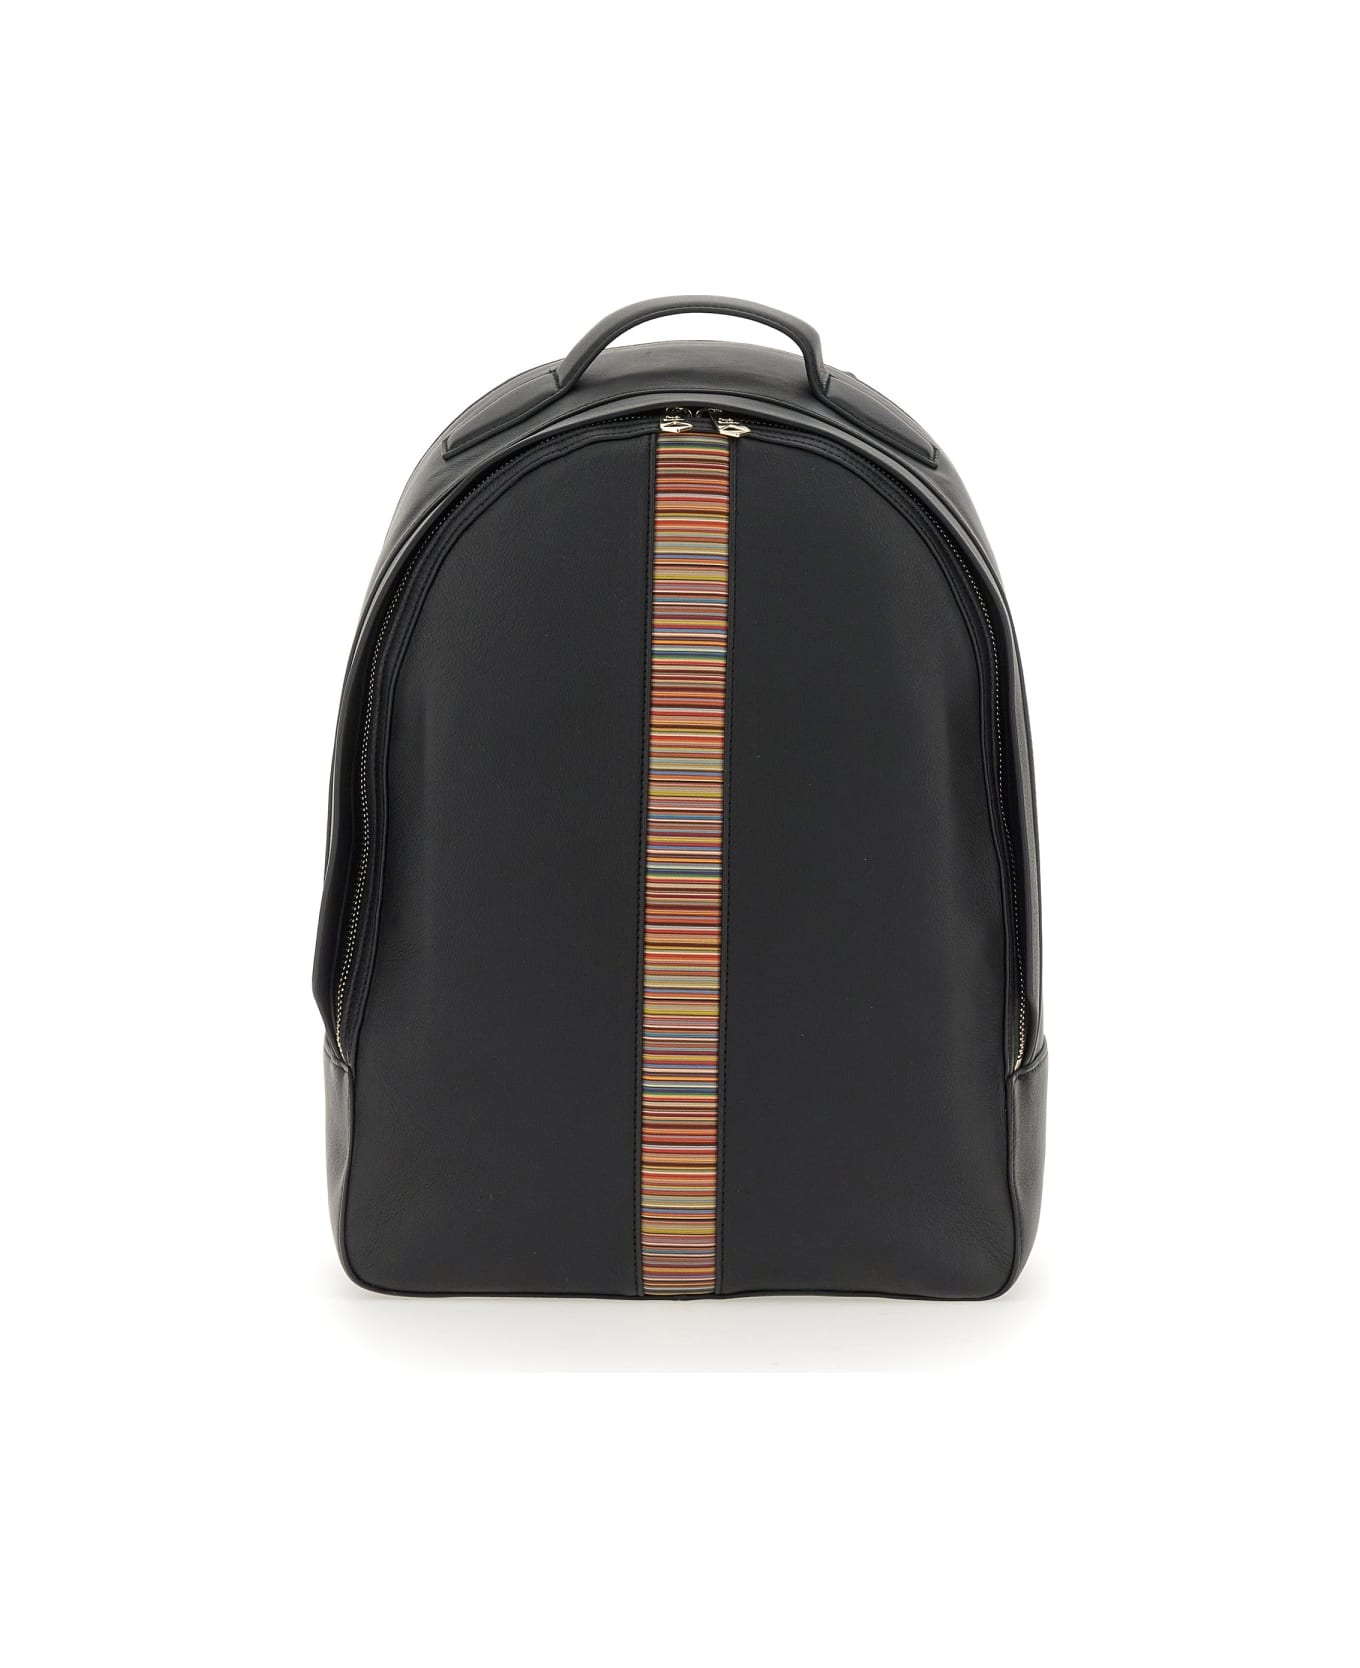 Paul Smith Signature Stripe Backpack - BLACK バックパック